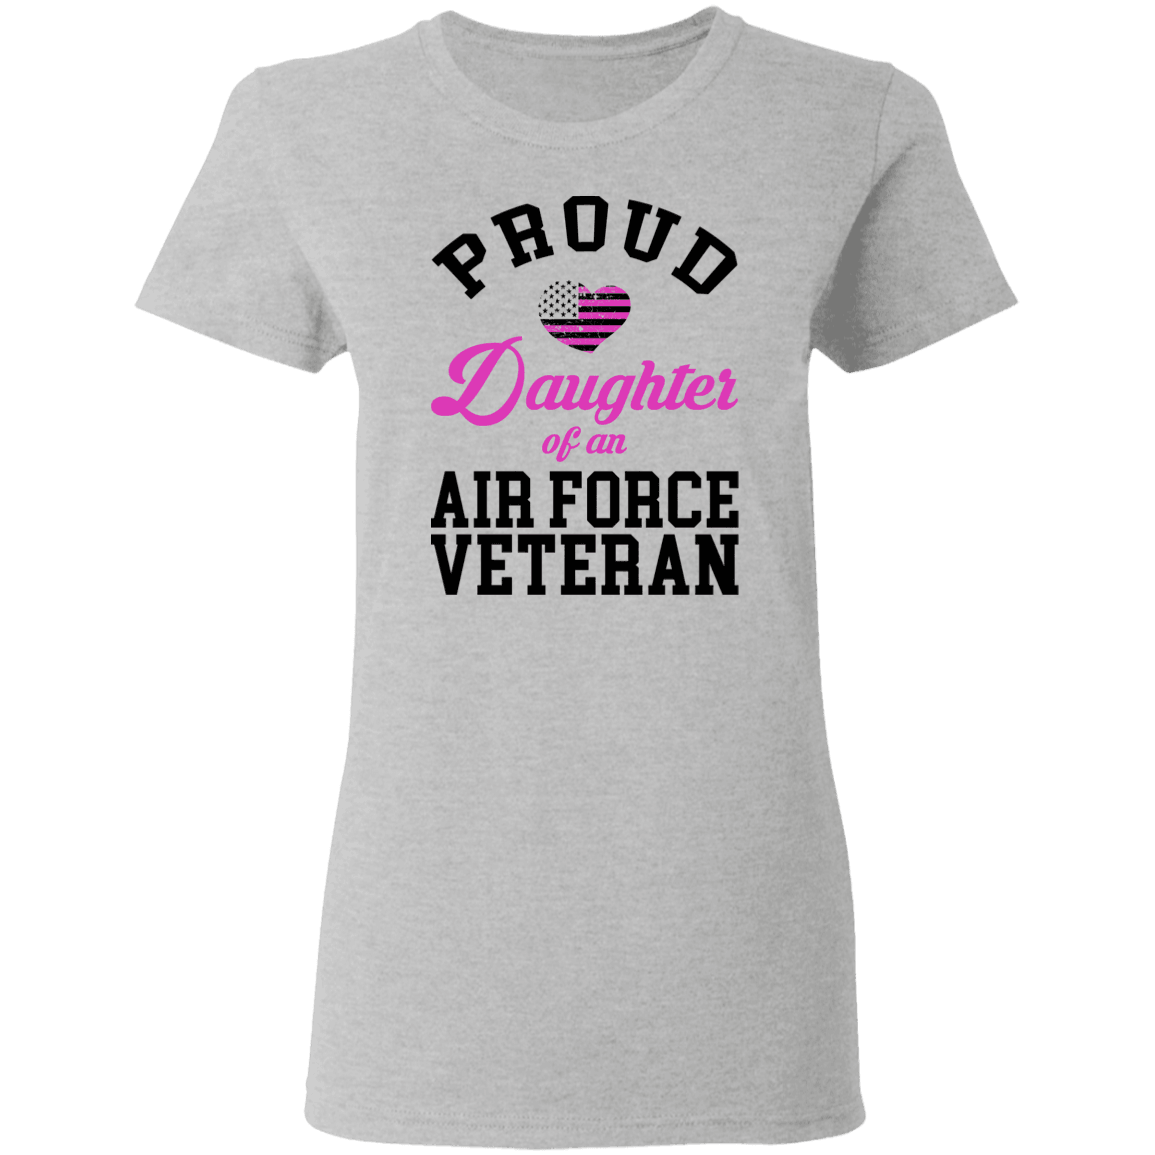 Designs by MyUtopia Shout Out:Proud Daughter of an Air Force Veteran Ultra Cotton  Ladies Round Neck T-Shirt,S / Sport Grey,Ladies T-Shirts